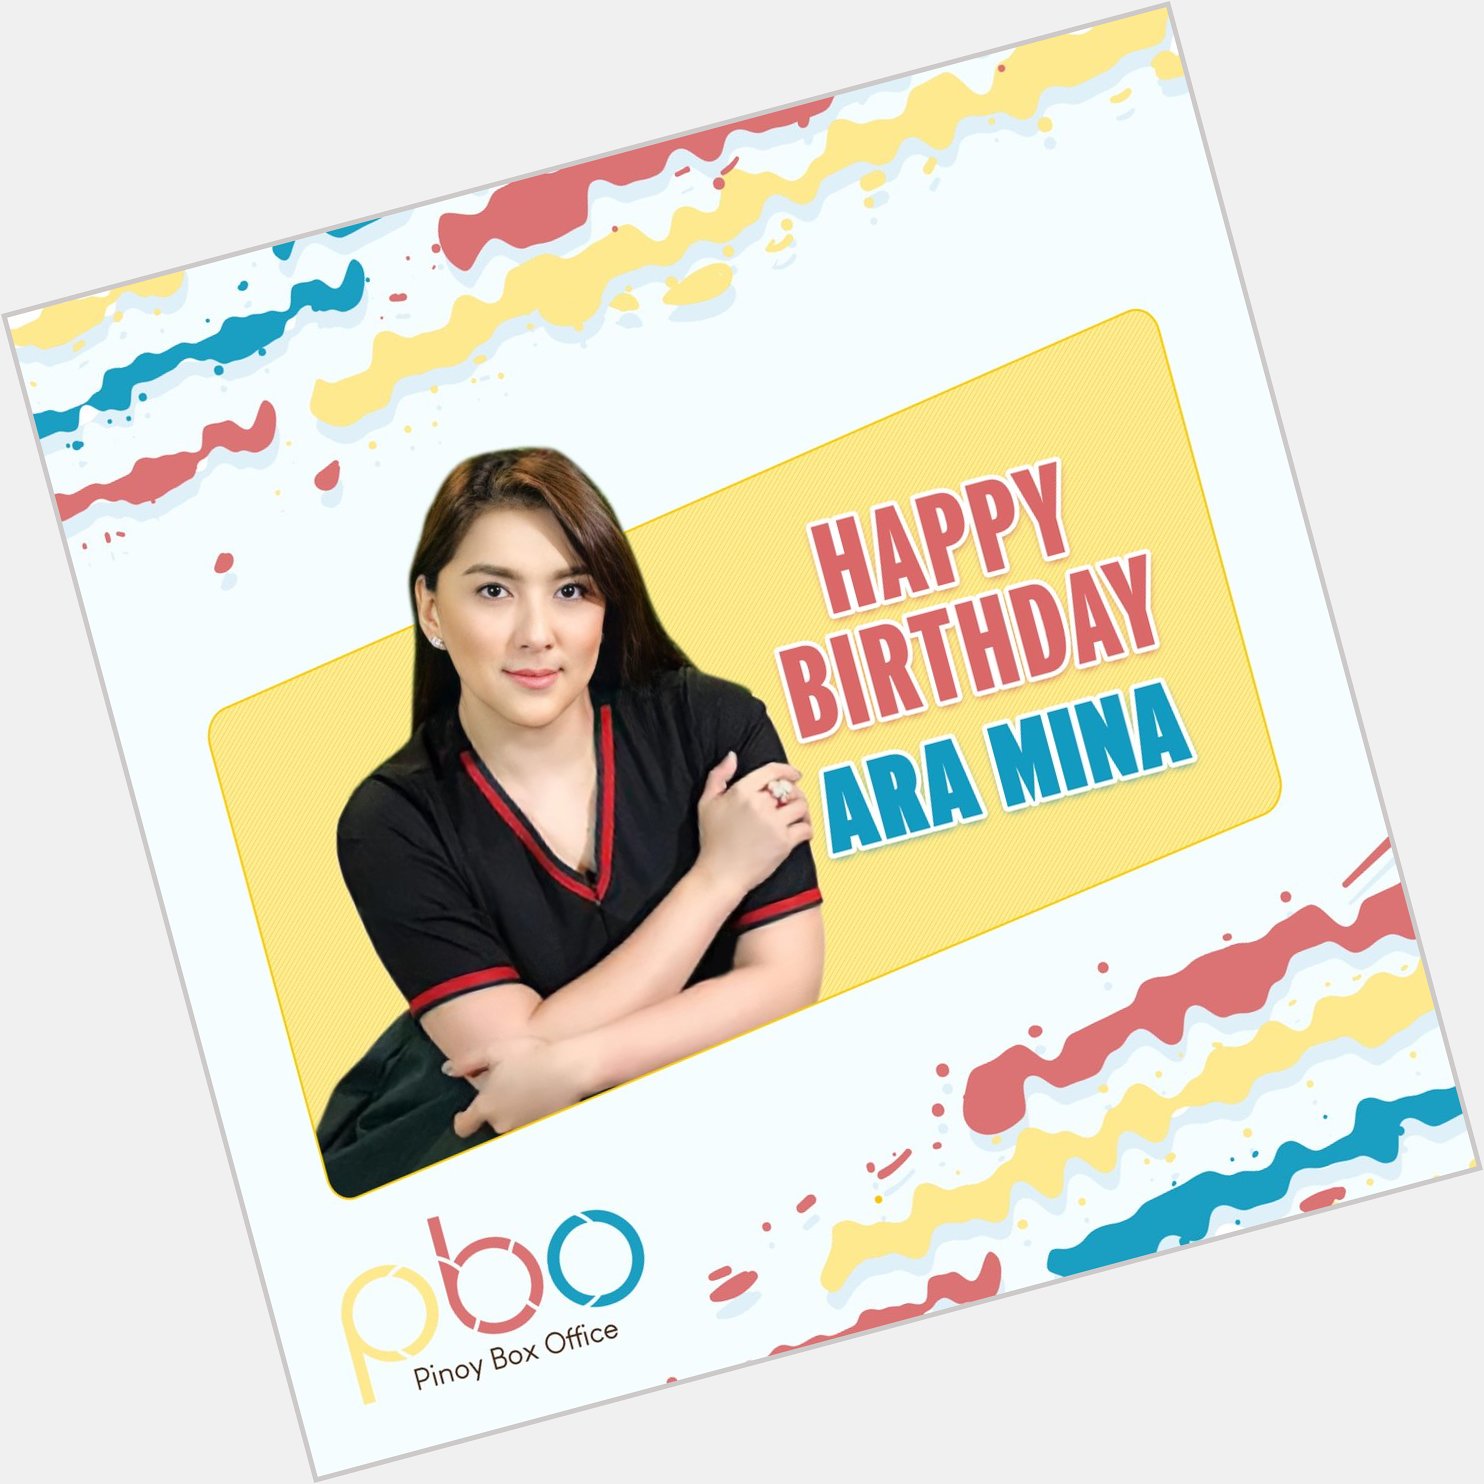 Happy birthday, Ara Mina! May you live your days happily and with no worries! 